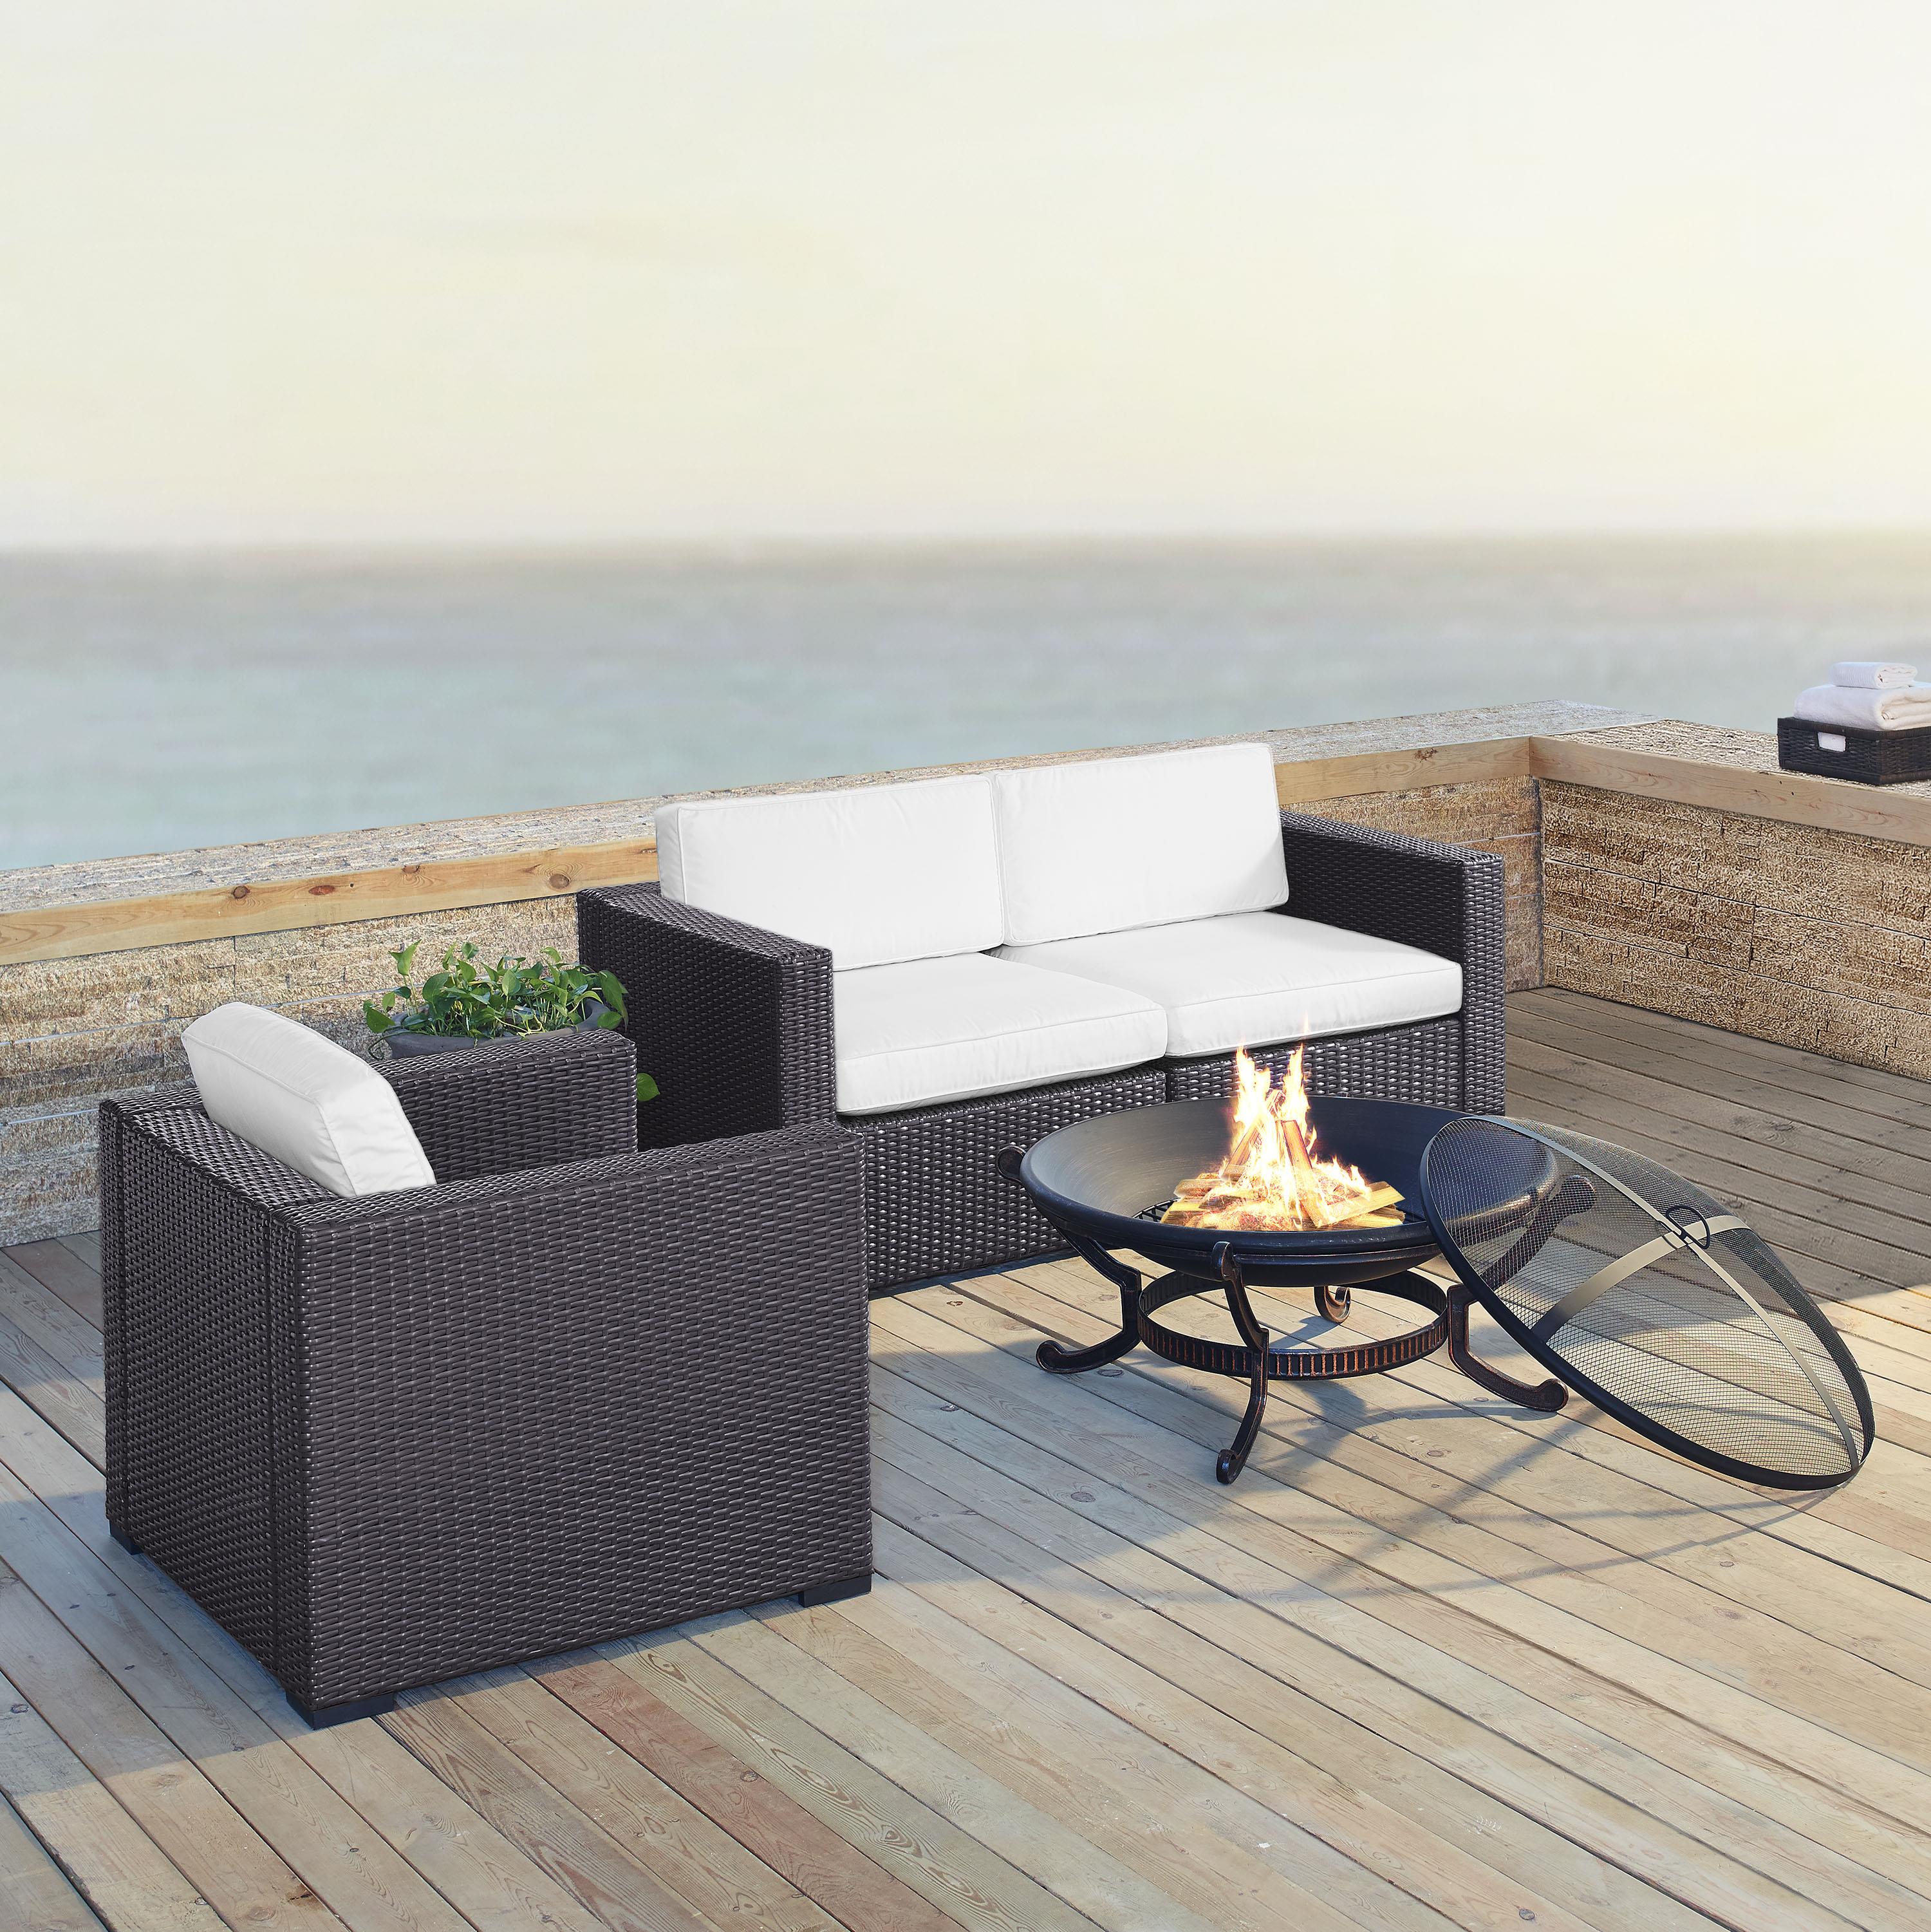 Crosley Biscayne 4 Piece Wicker Patio Fire Pit Sofa Set in Brown and White - image 3 of 4